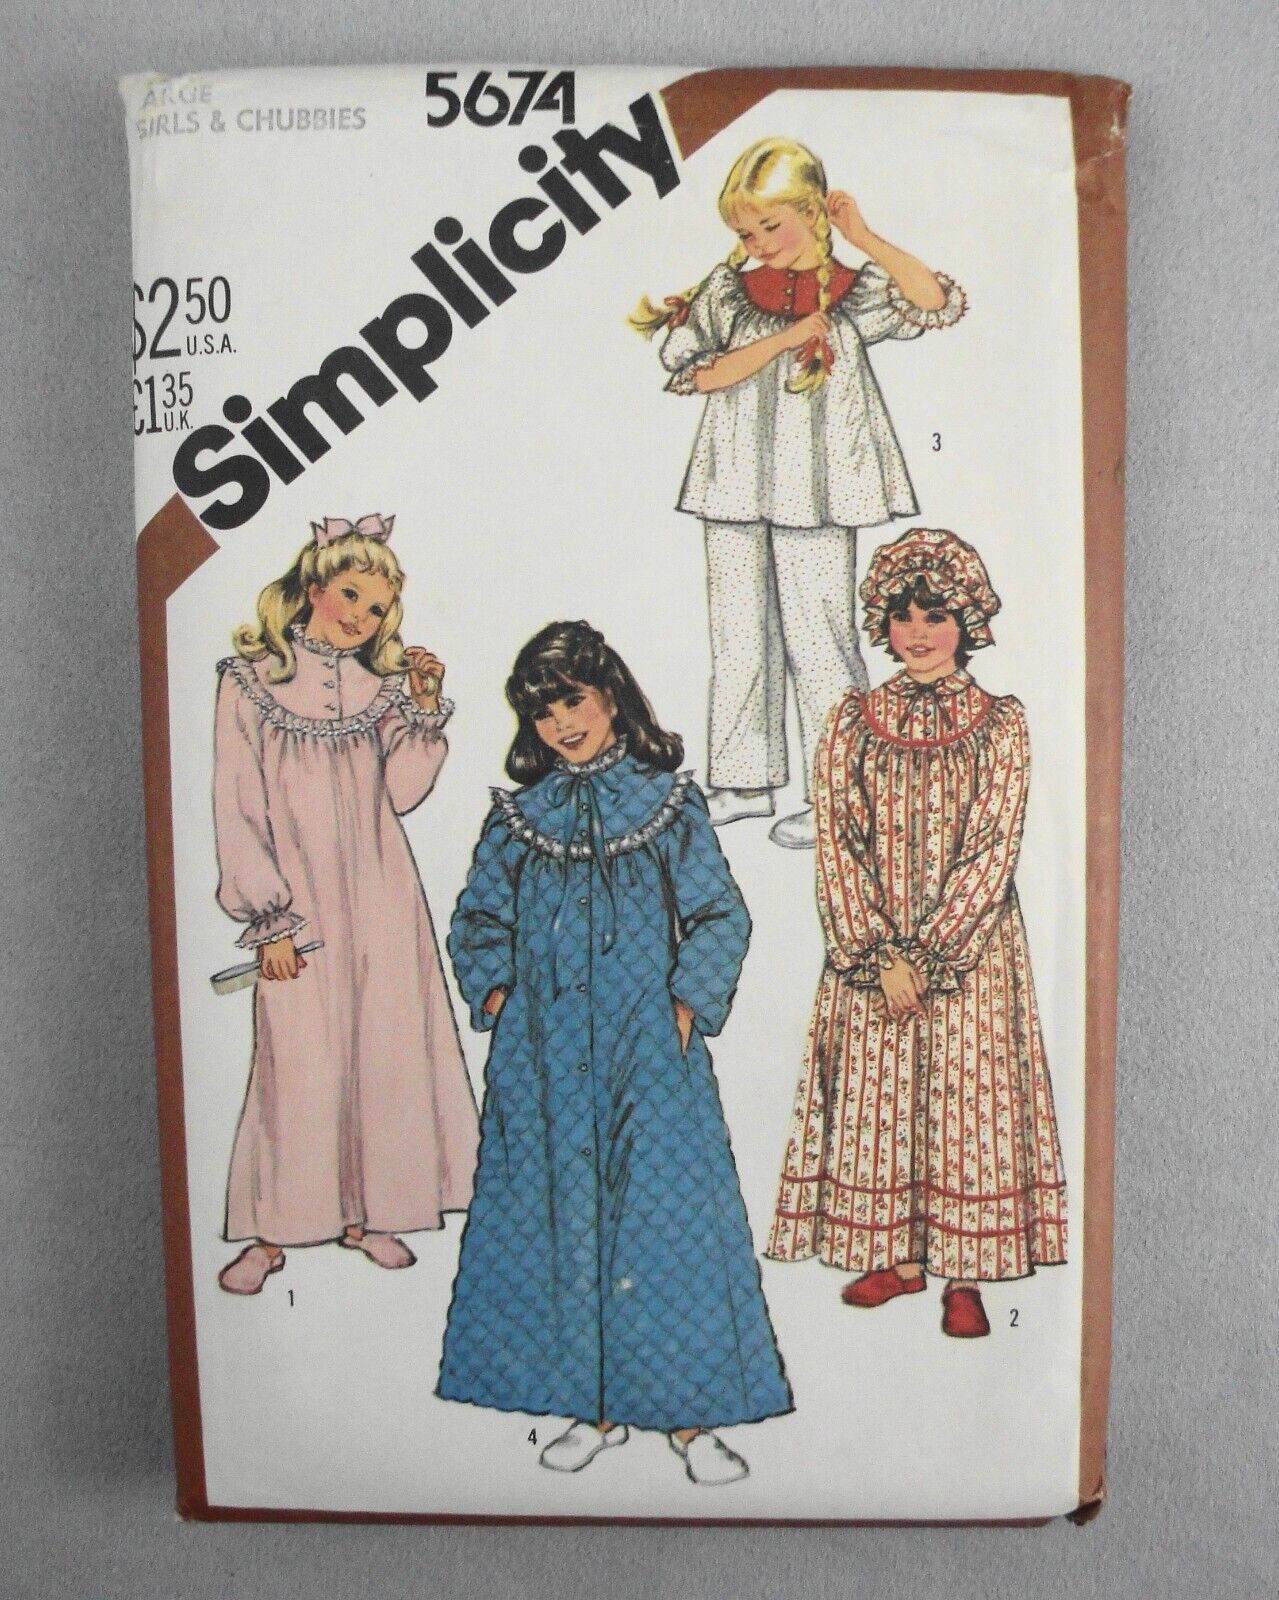 Primary image for Simplicity 5674 Sleepwear Robe Nightgown Pajamas Hat 80's Large Girls & Chubbies